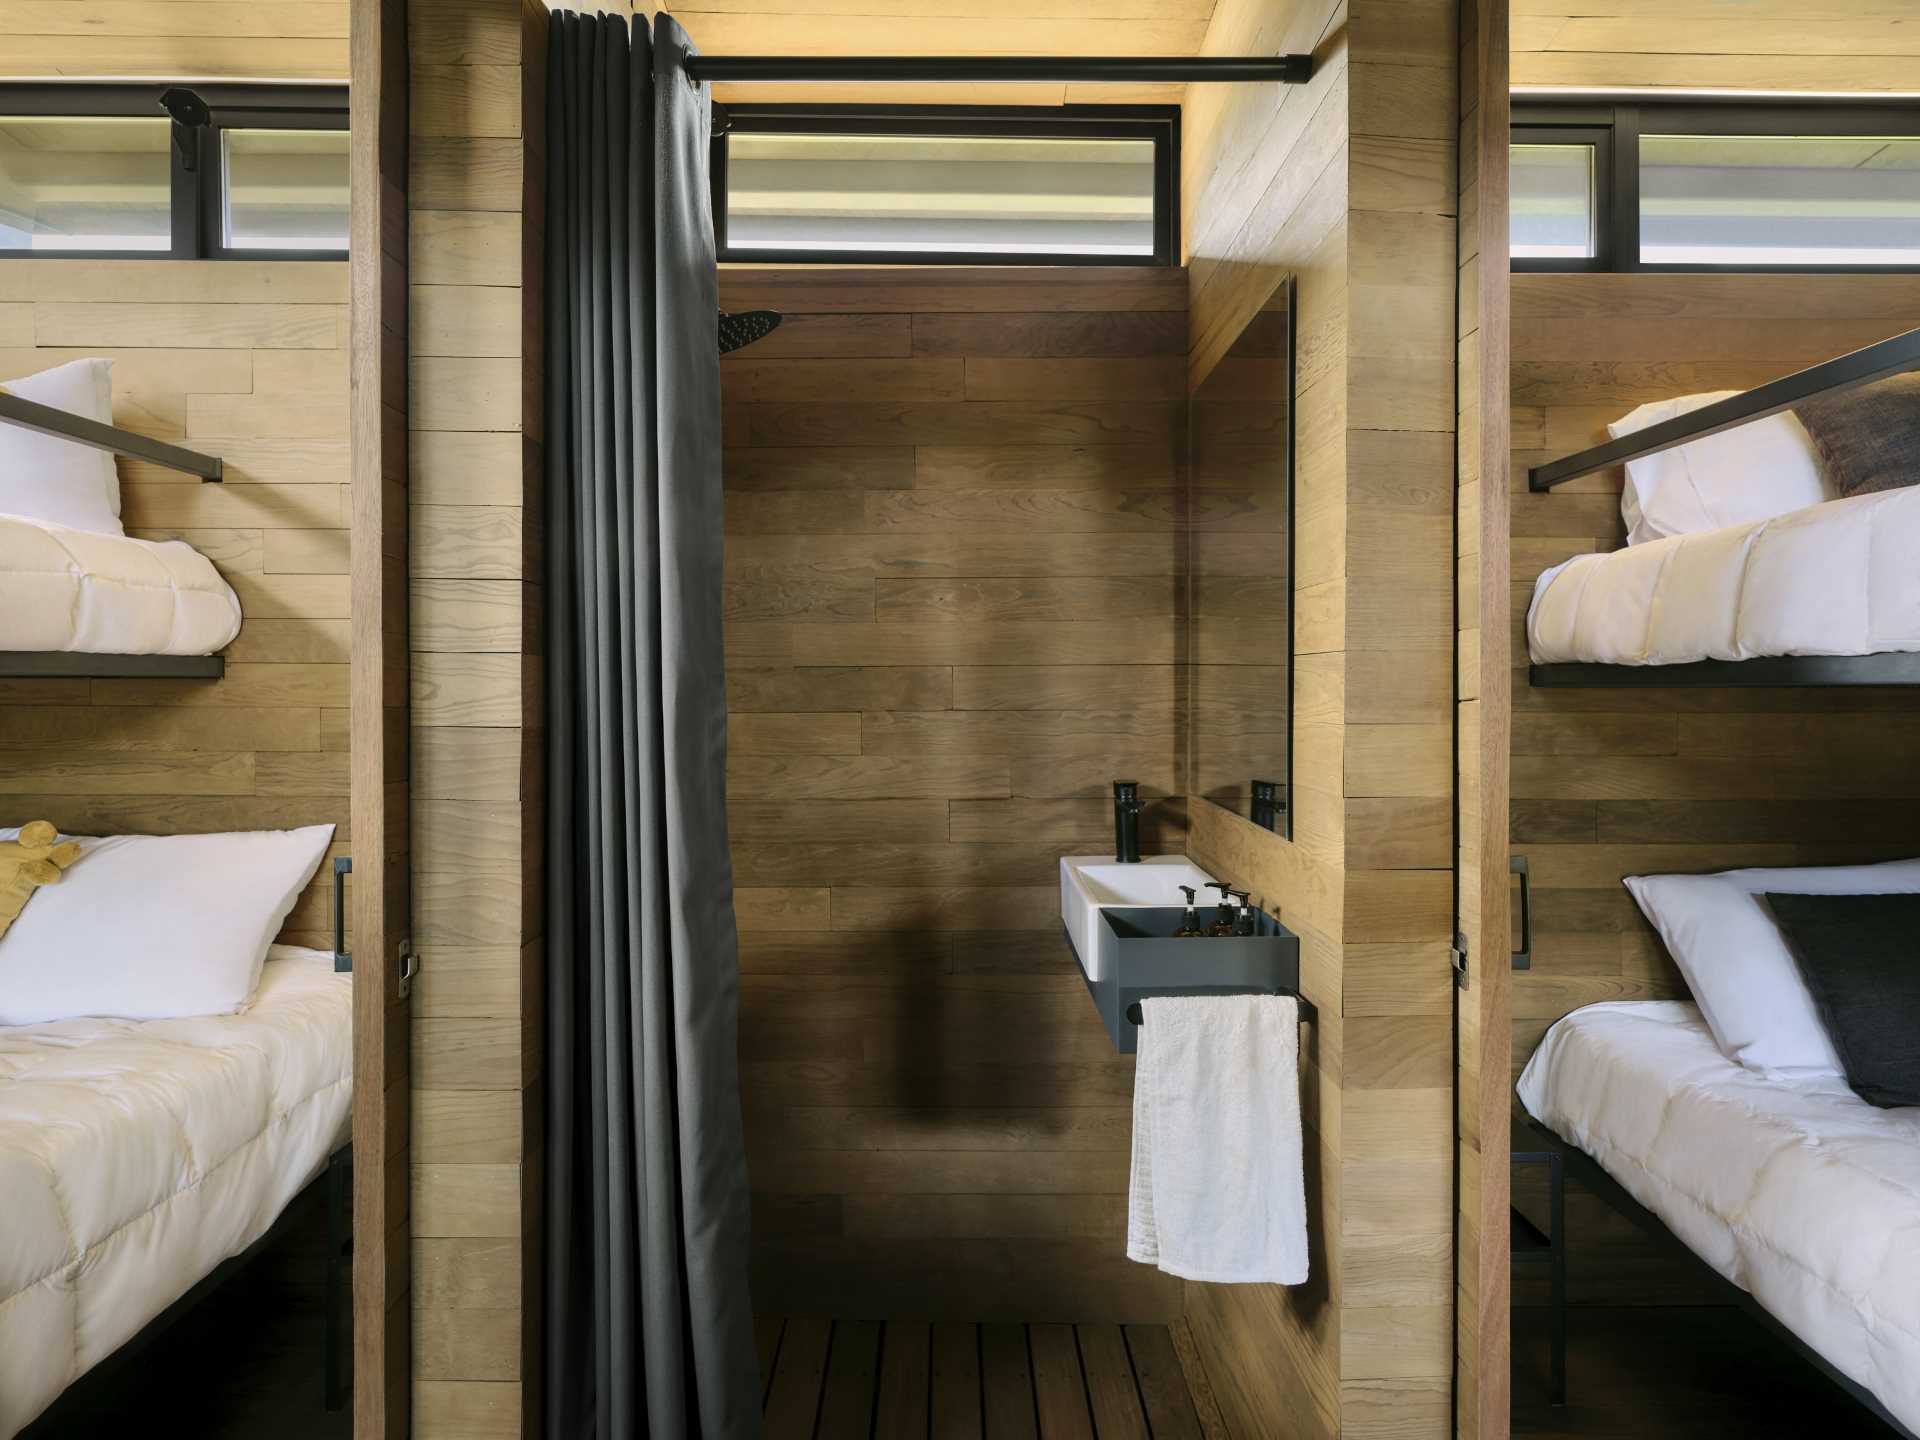 Two bedrooms with bunk beds are separated by a bathroom.